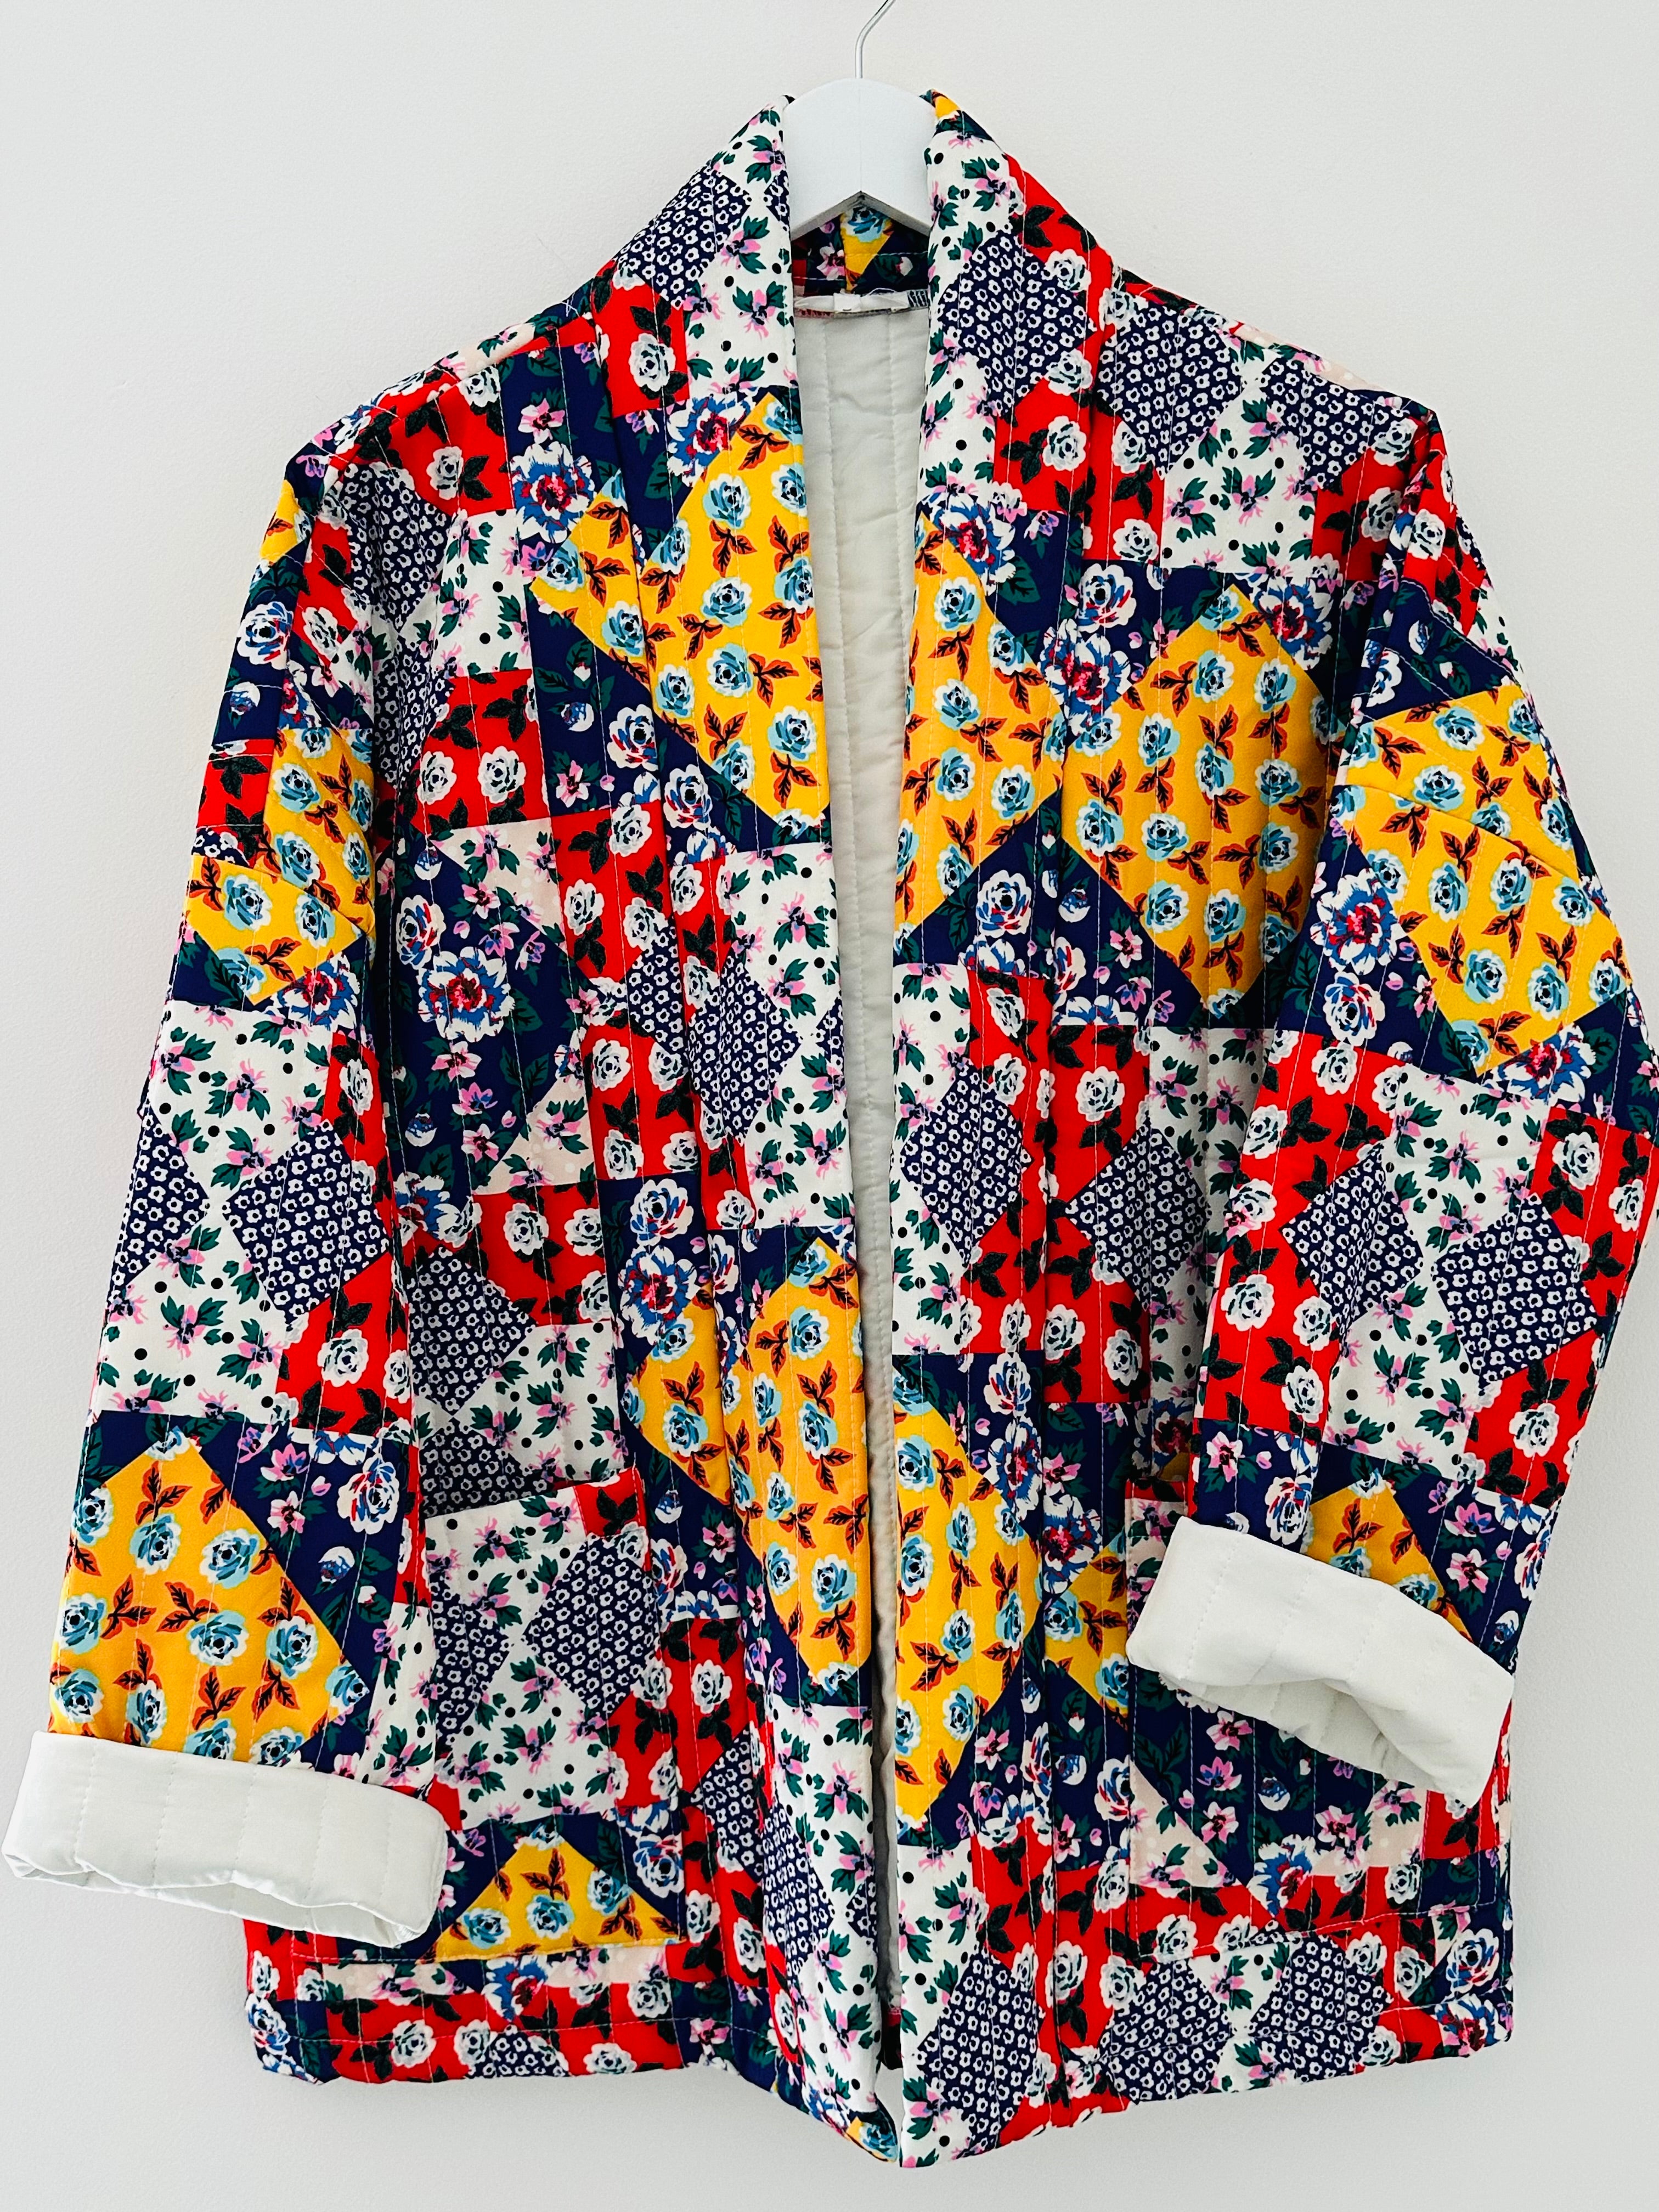 Quilted Floral Jacket in Reds